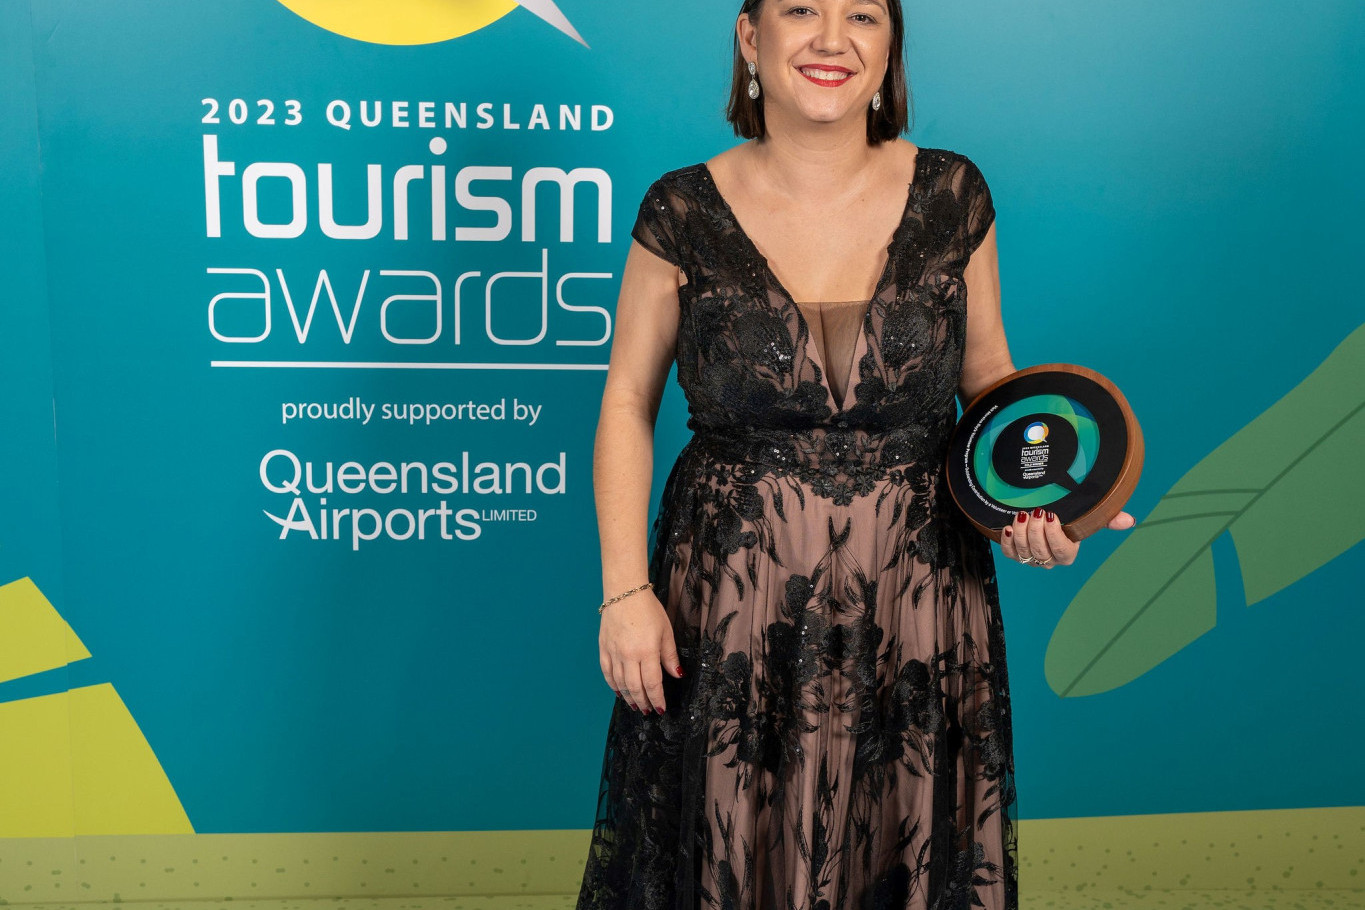 MBRIT CEO Natassia Wheeler accepting the gold award at the Queensland Tourism Awards.